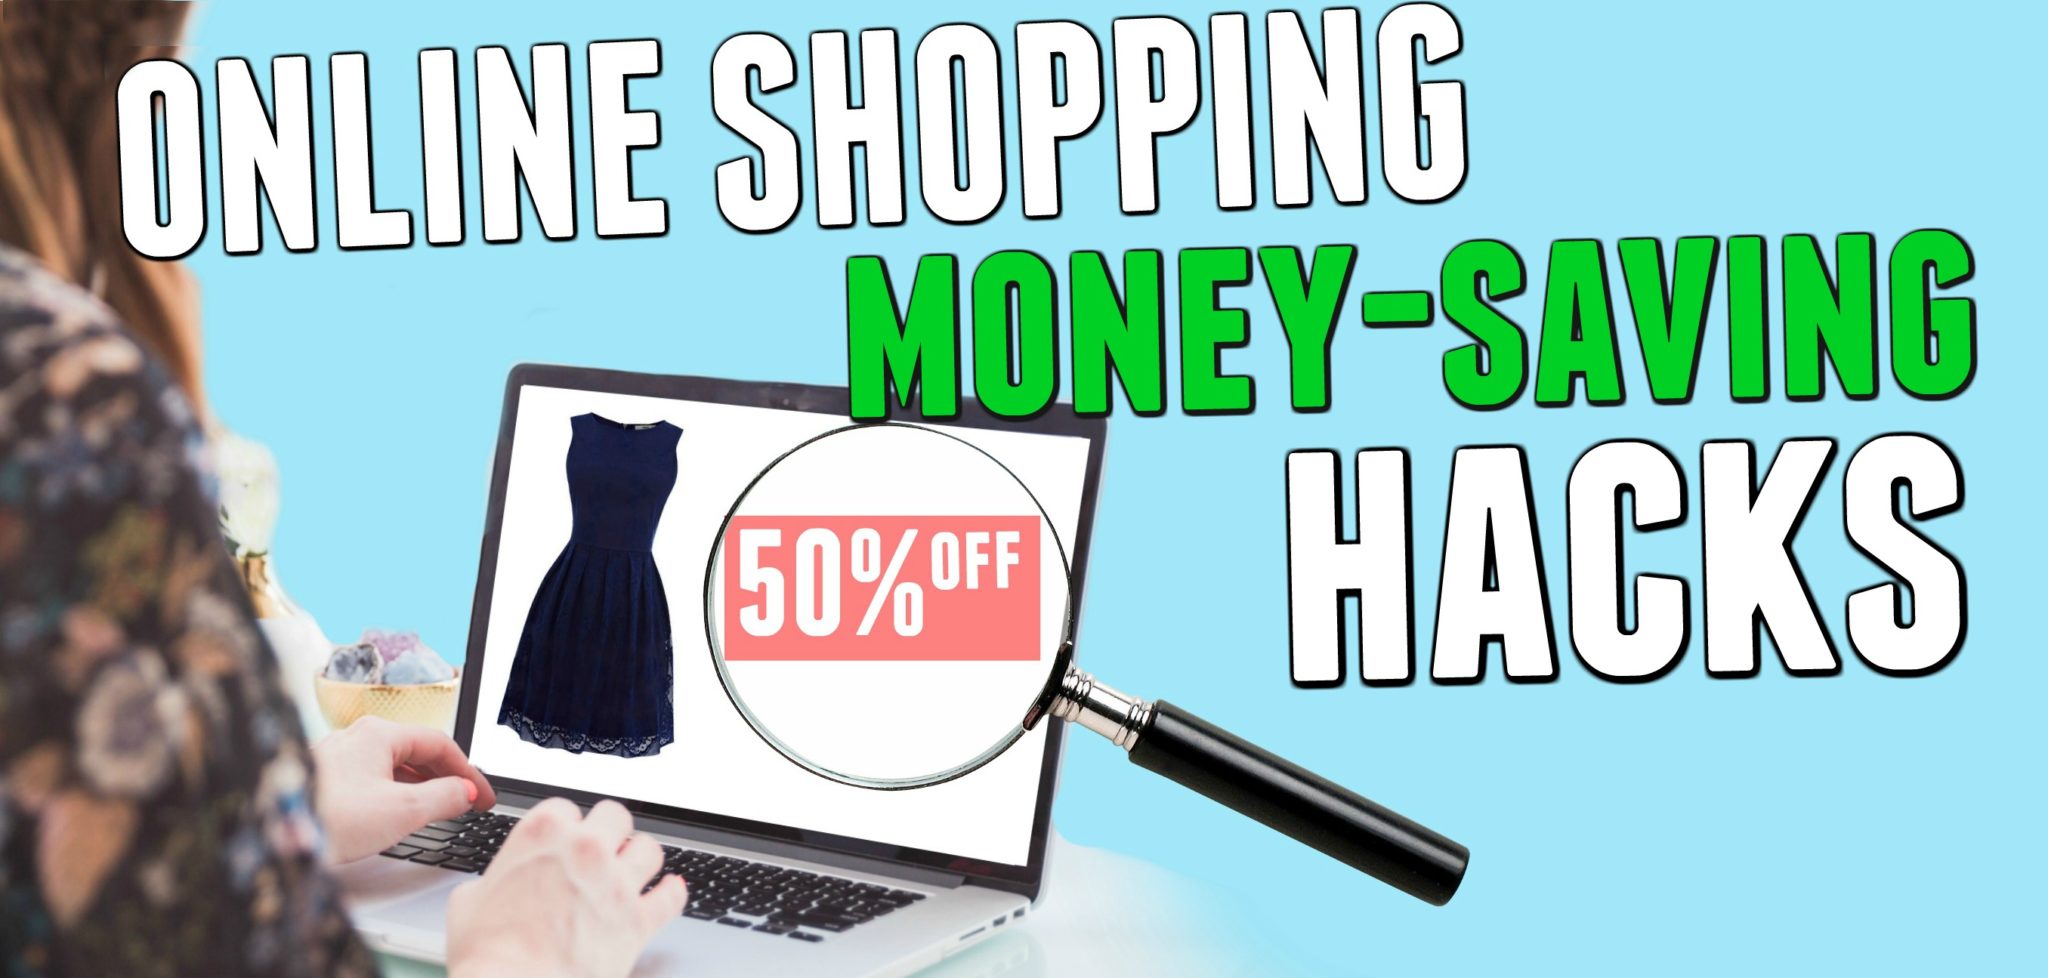 How to Save Money When Shopping Online